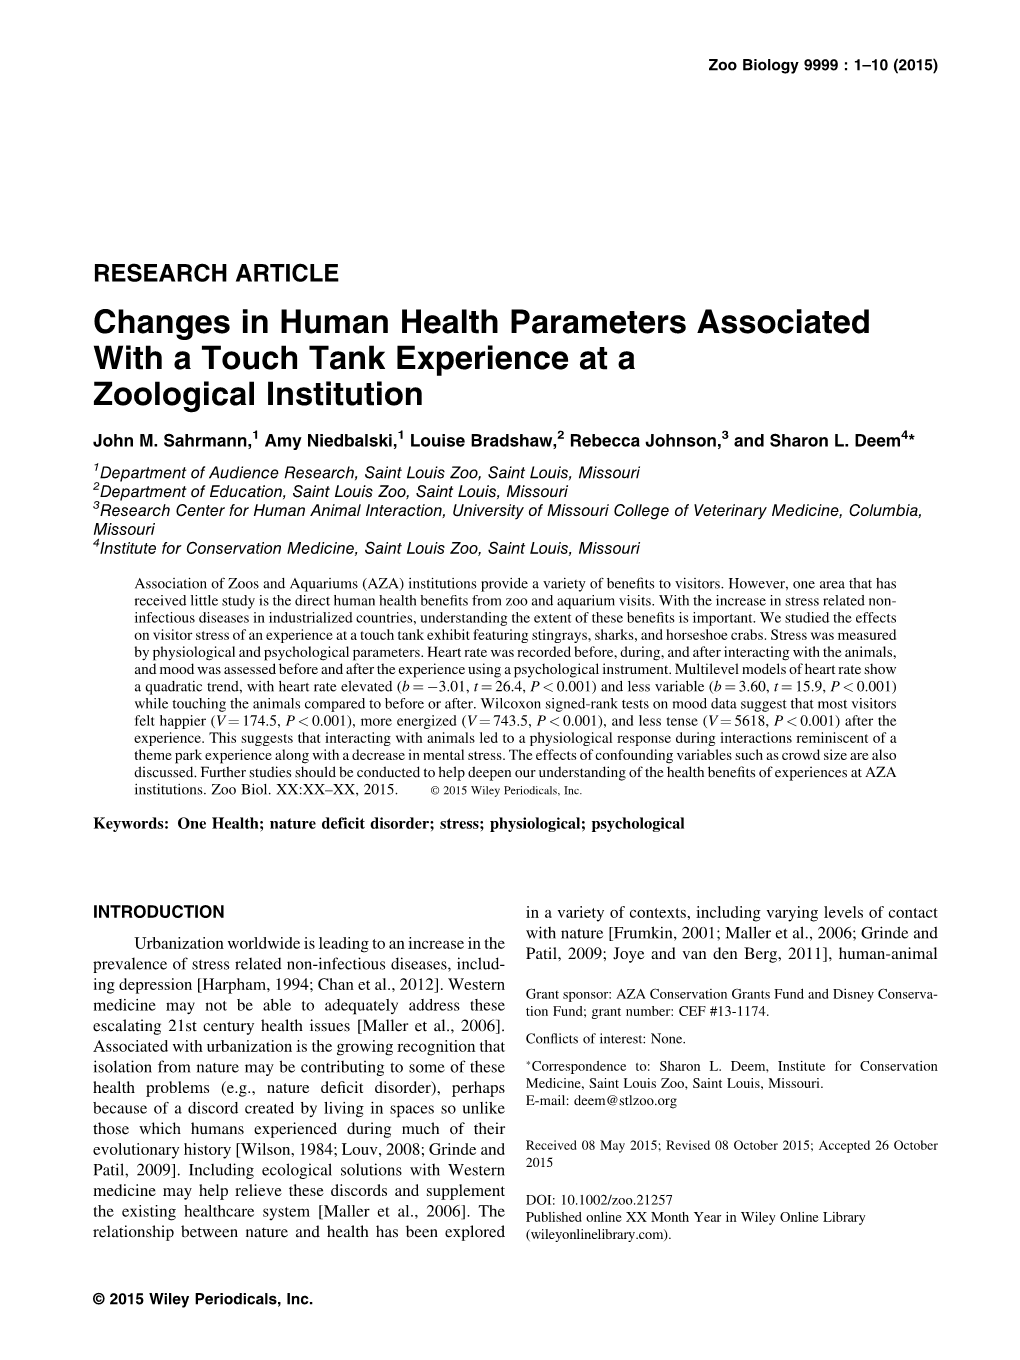 Changes in Human Health Parameters Associated with a Touch Tank Experience at a Zoological Institution